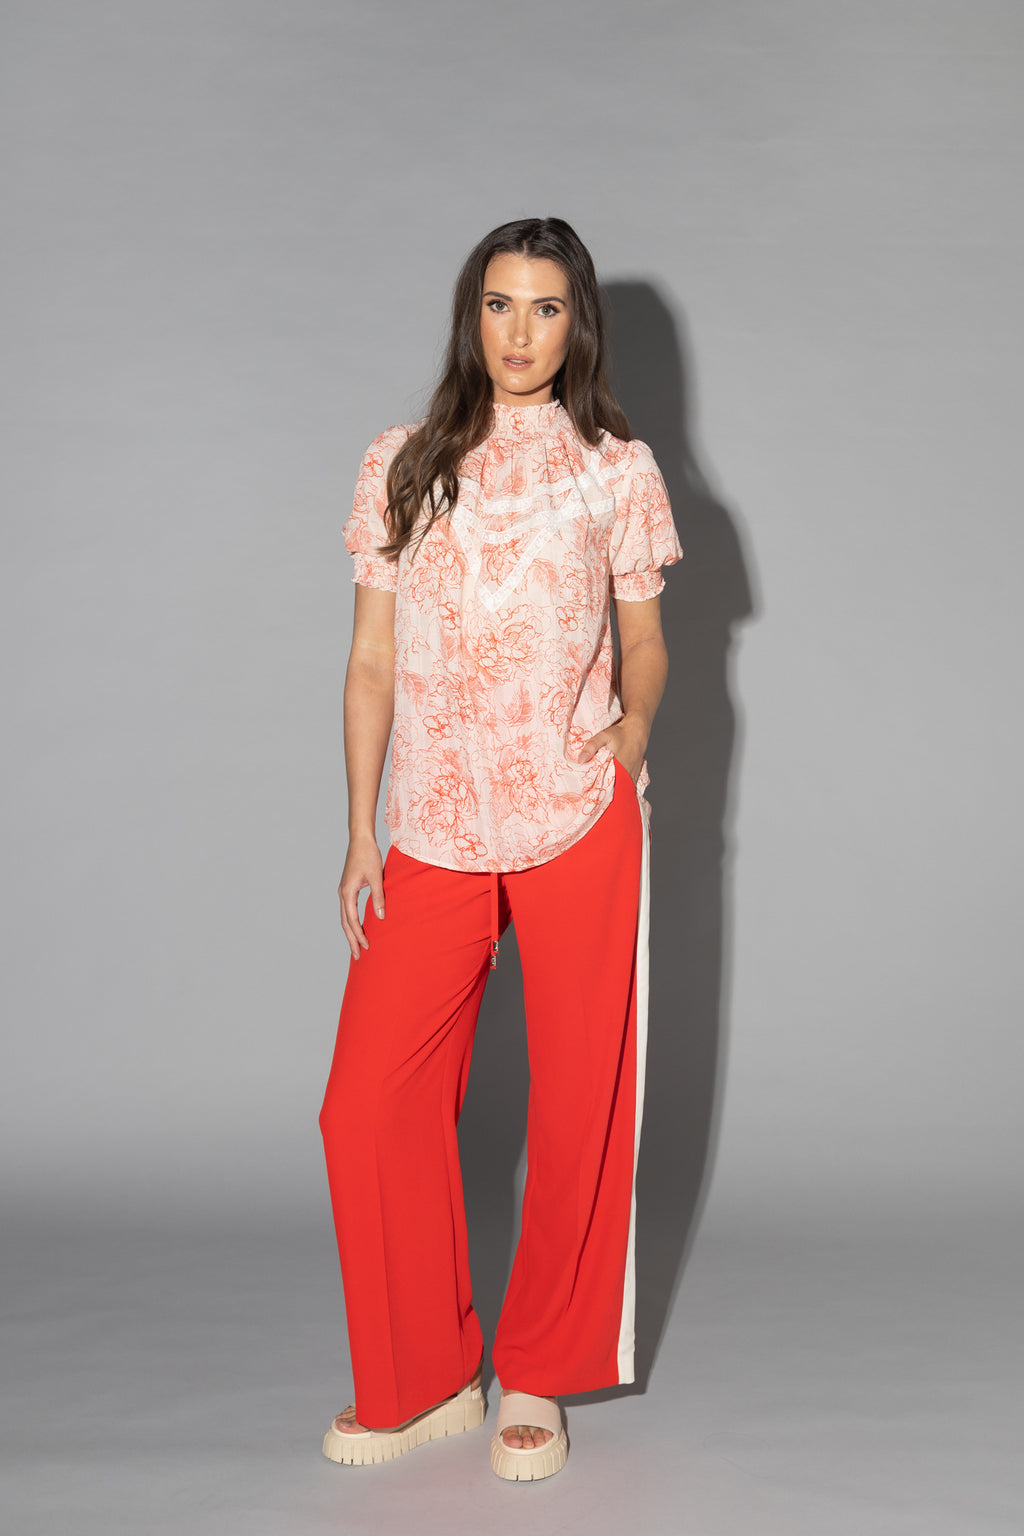 1233 - Zendy Top - Etched Rose